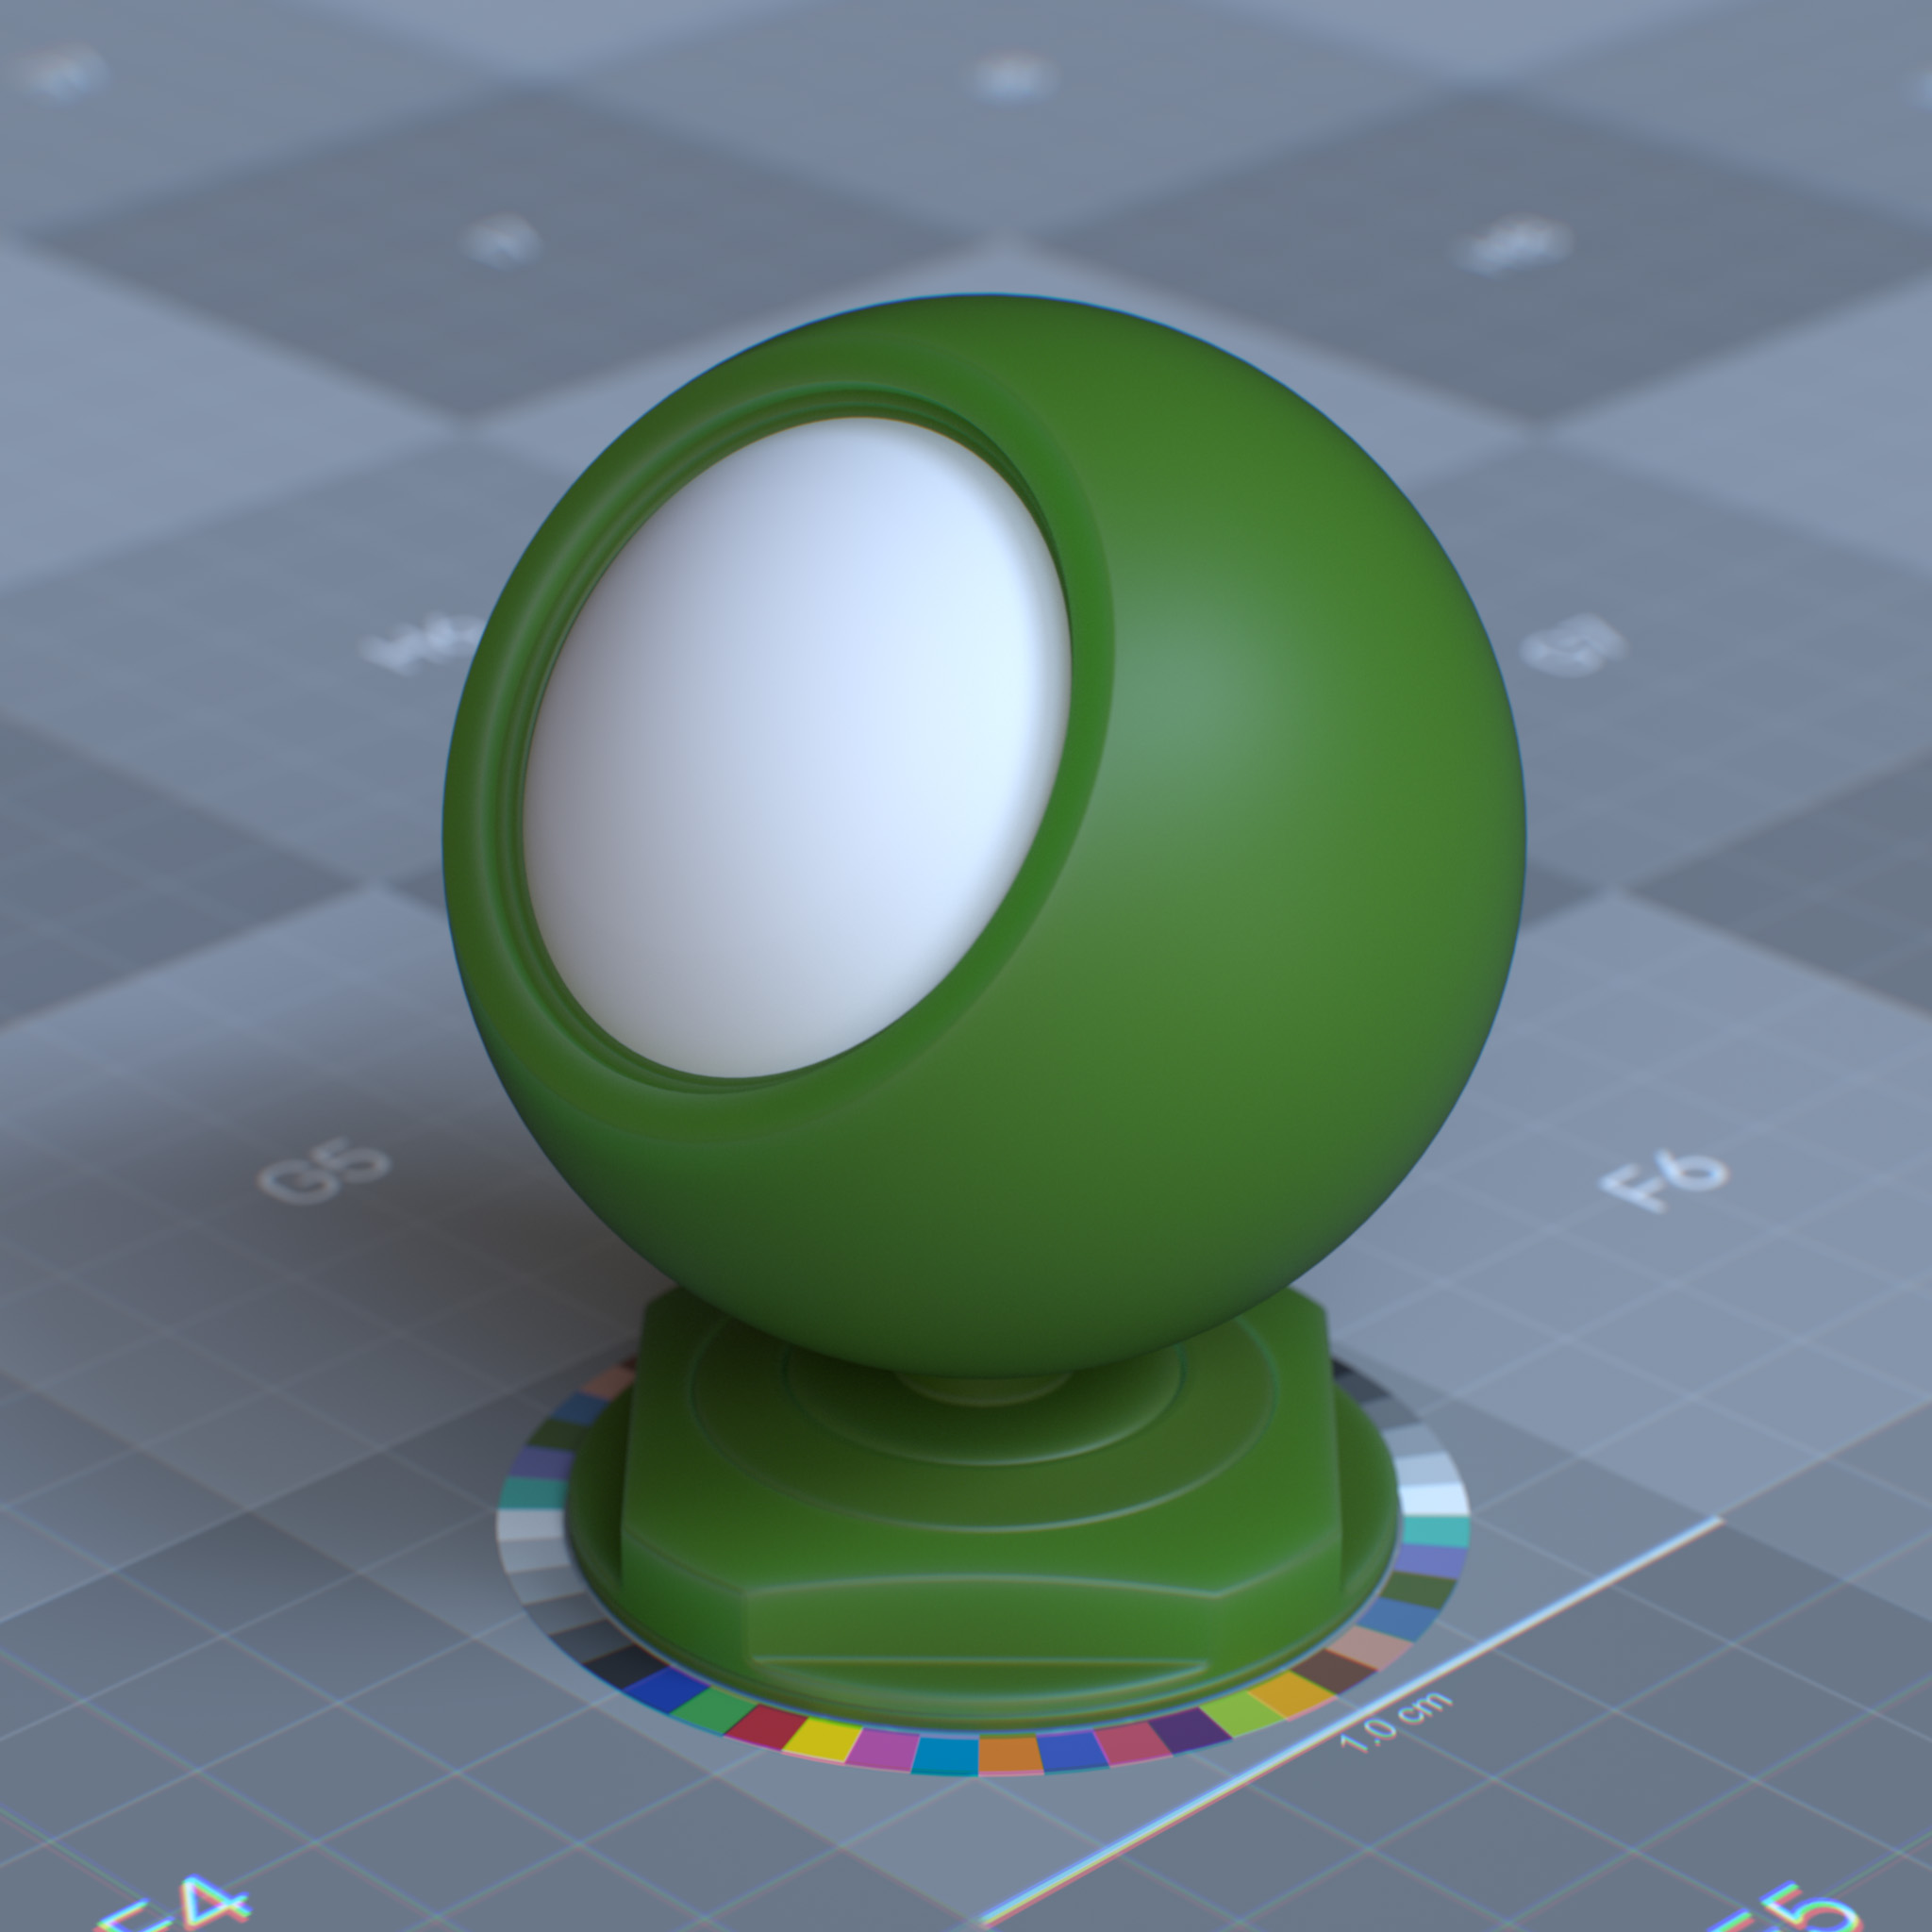 rtx_material_omnisurfacebase_specular_reflection_roughness_0p5